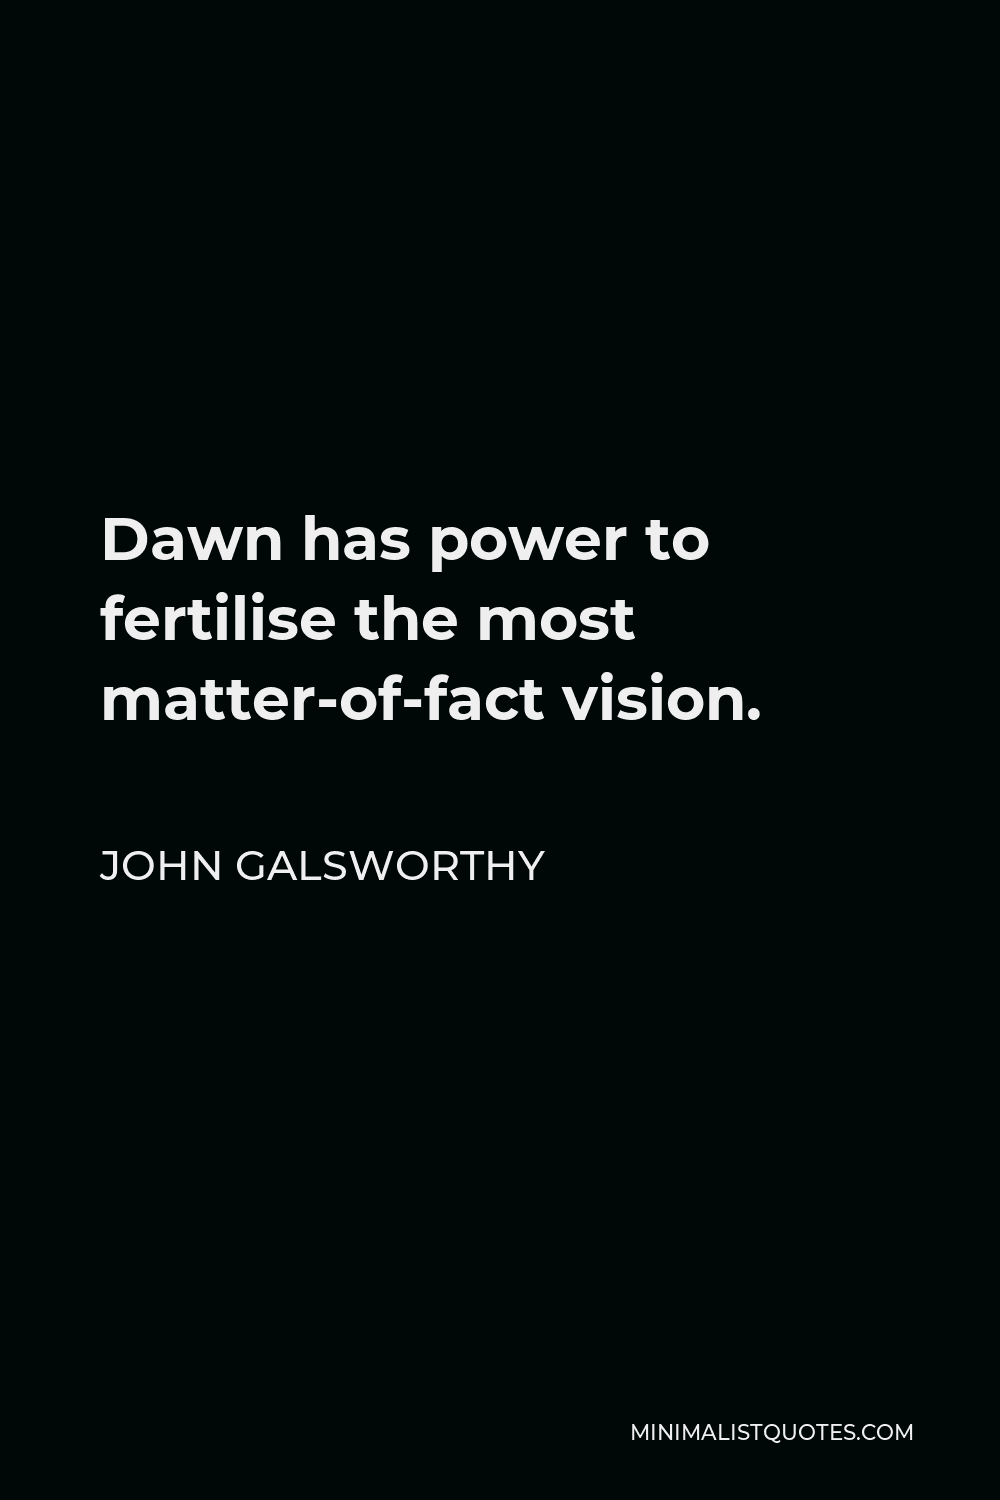 John Galsworthy Quote - Dawn has power to fertilise the most matter-of-fact vision.